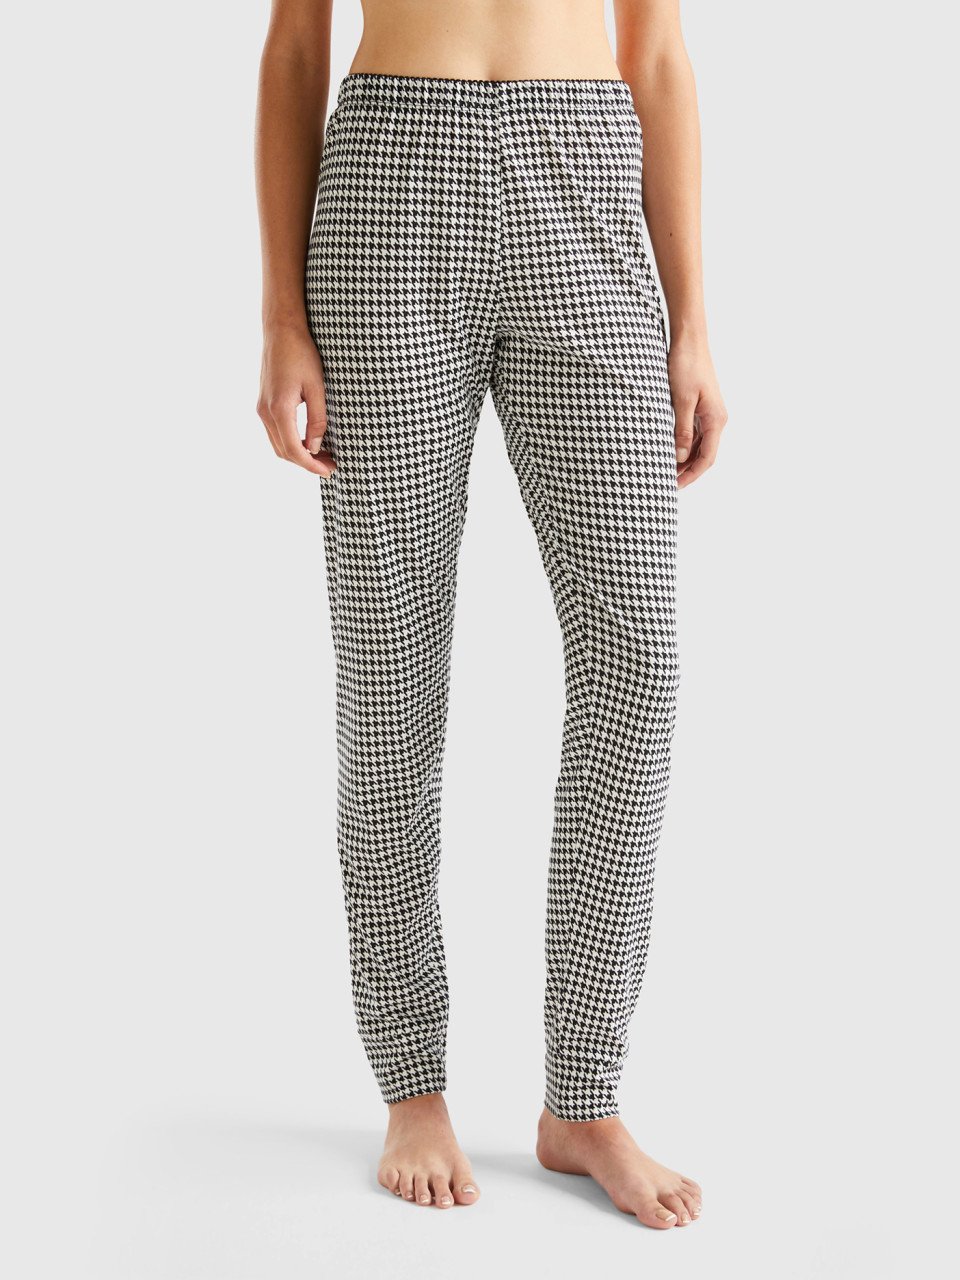 Benetton, Houndstooth Trousers, Multi-color, Women